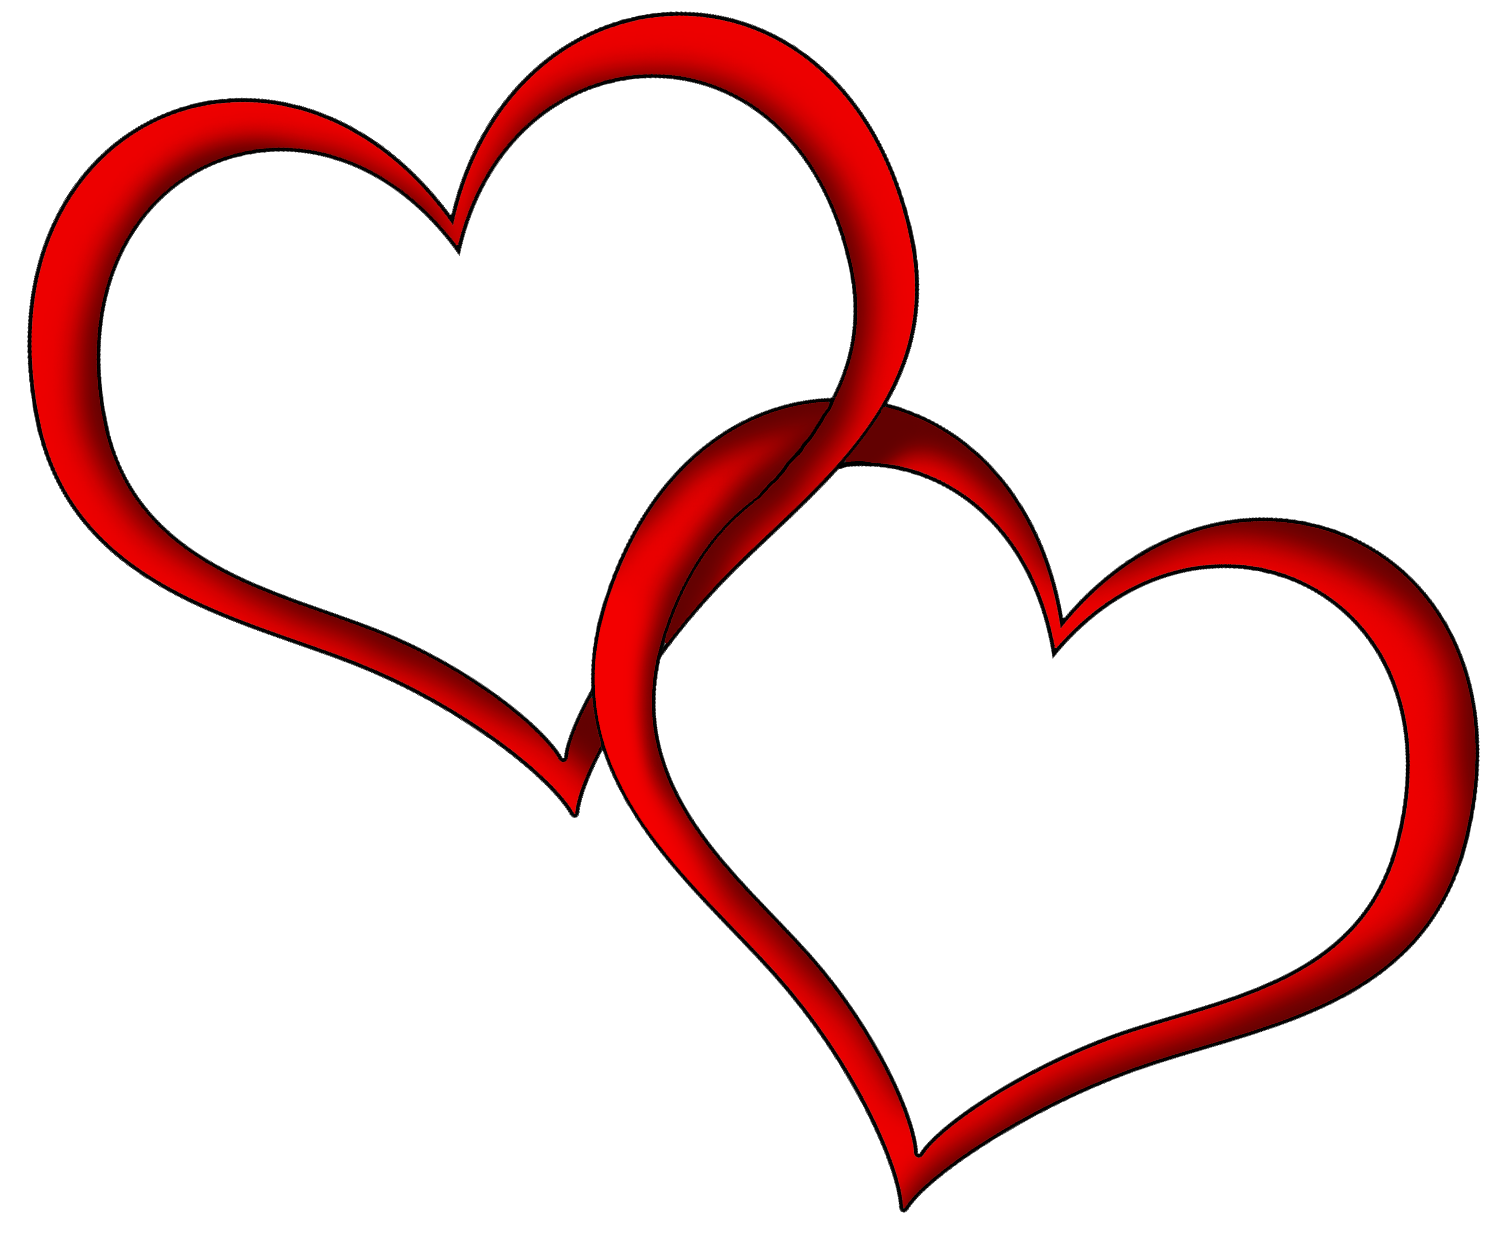 Heart clipart outline png